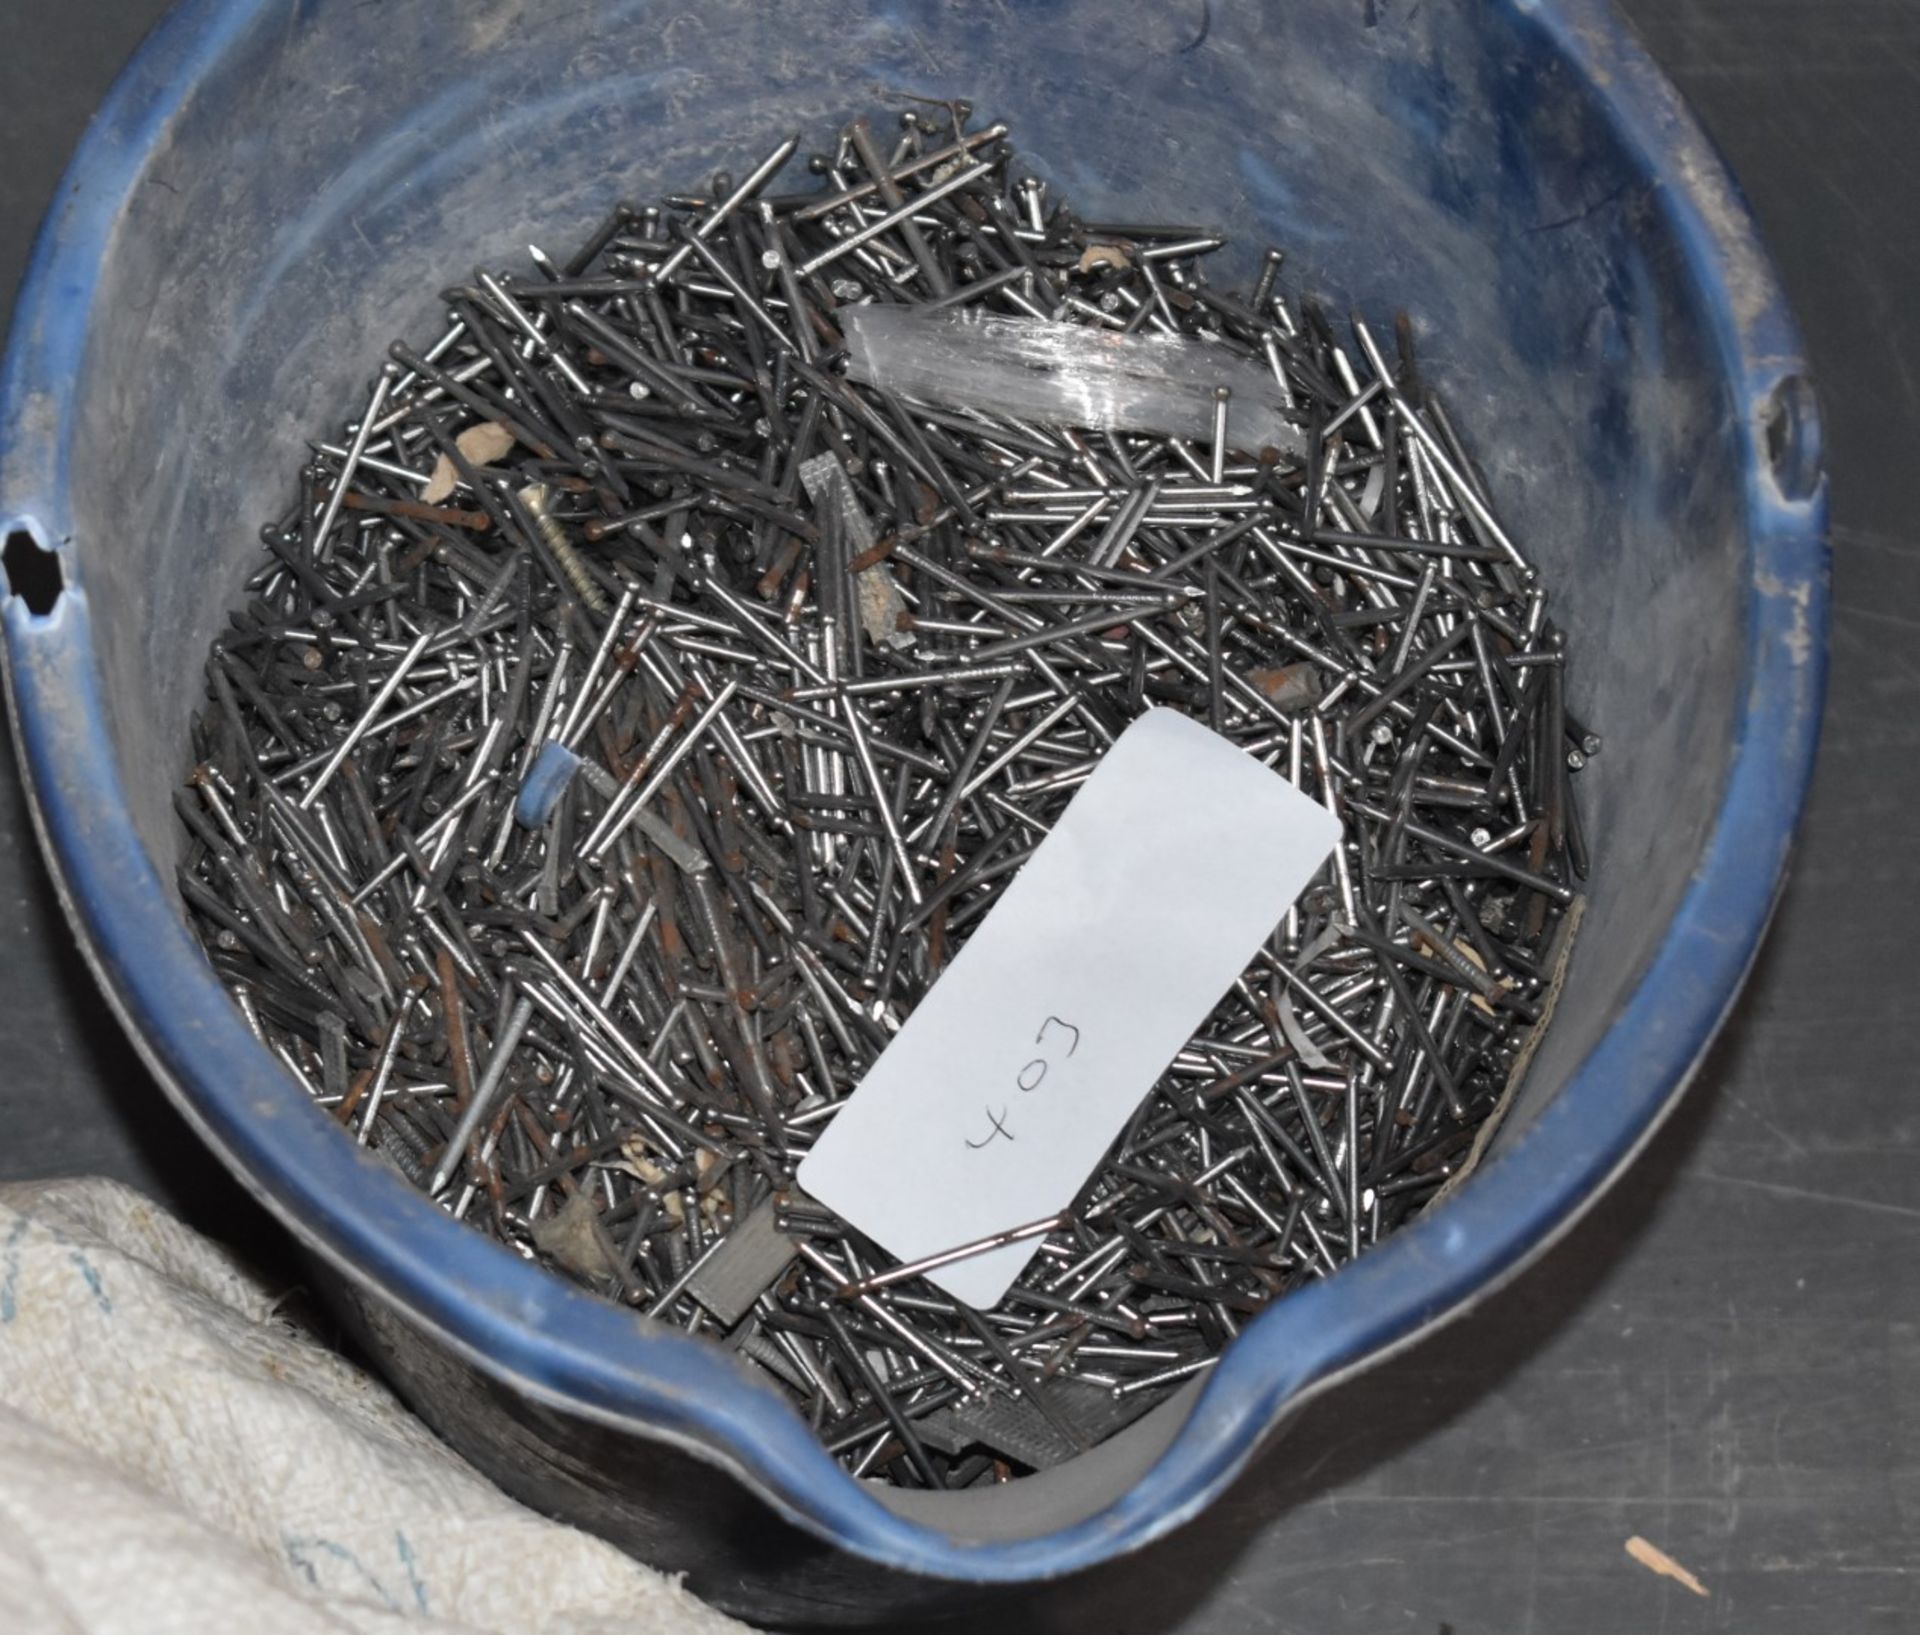 1 x Large Collection of Nails - Includes Large Sack, Box and Bucket Filled With Various Sized - Image 2 of 5